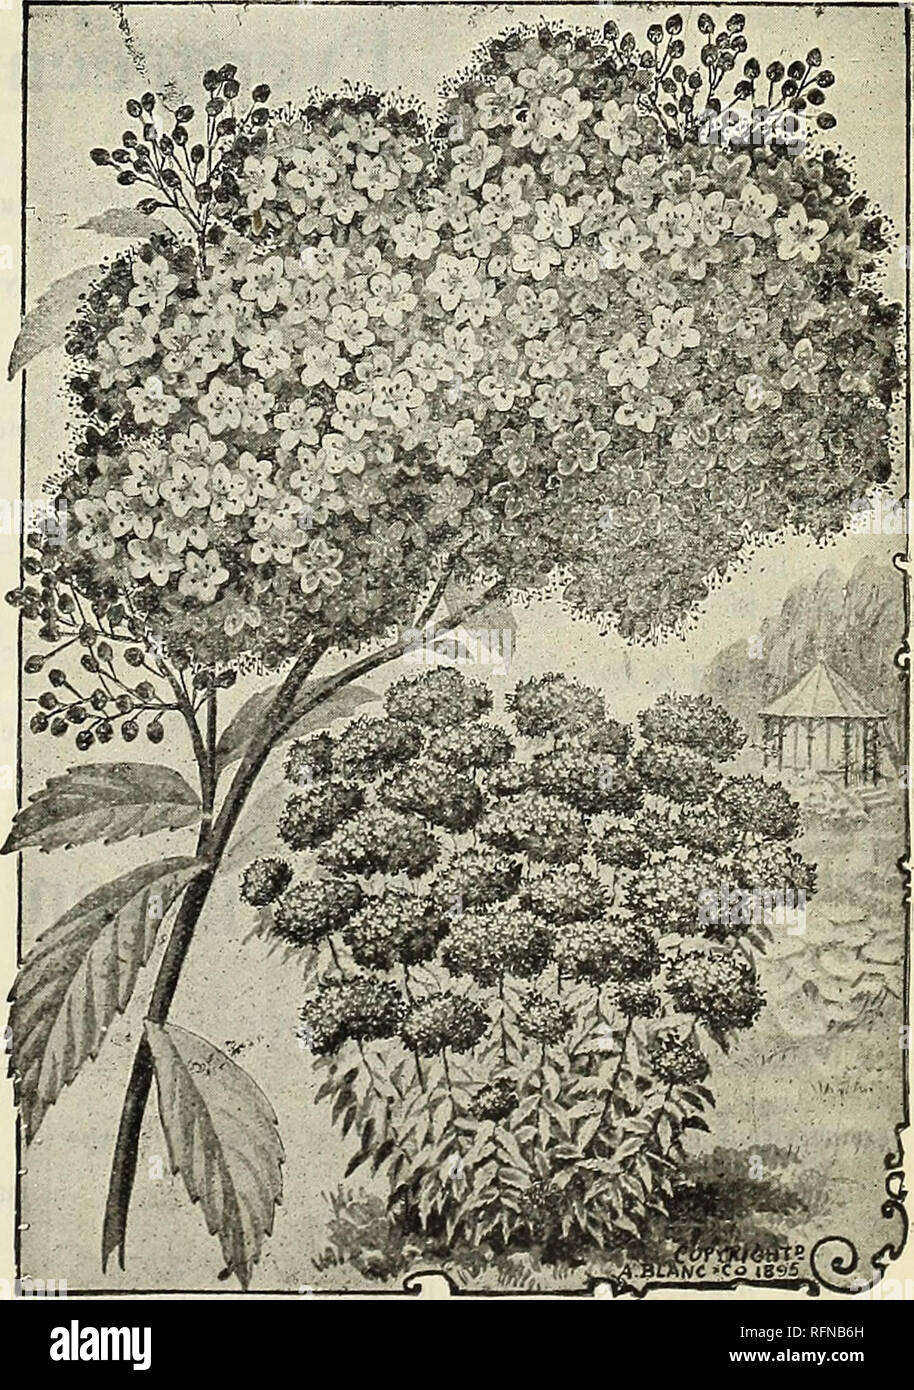 . Seeds, plants &amp; bulbs. Nurseries (Horticulture) New Jersey Catalogs; Plants, Ornamental Catalogs; Bulbs (Plants) Catalogs; Flowers Seeds Catalogs; Vegetables seeds catalogs. GENERAL CATALOGUE OP SEEDS, PLANTS AND BULBS. 49 POPULUS (Poplar). aurea Van Geertii. &quot;Van Geert's Golden Poplar.&quot; Golden yellow foliage; very fine for massing. 75 cts. fasticjiata or dilatata. &quot;Lombardy Poplar.&quot; A well known species of very rapid growth. 50 cts. SALIX. caprea pendula. The well known Kilmarnock Weeping Willow. 75 cts. T1LIA (Linden). europsea. &quot; European Linden.&quot; A very  Stock Photo